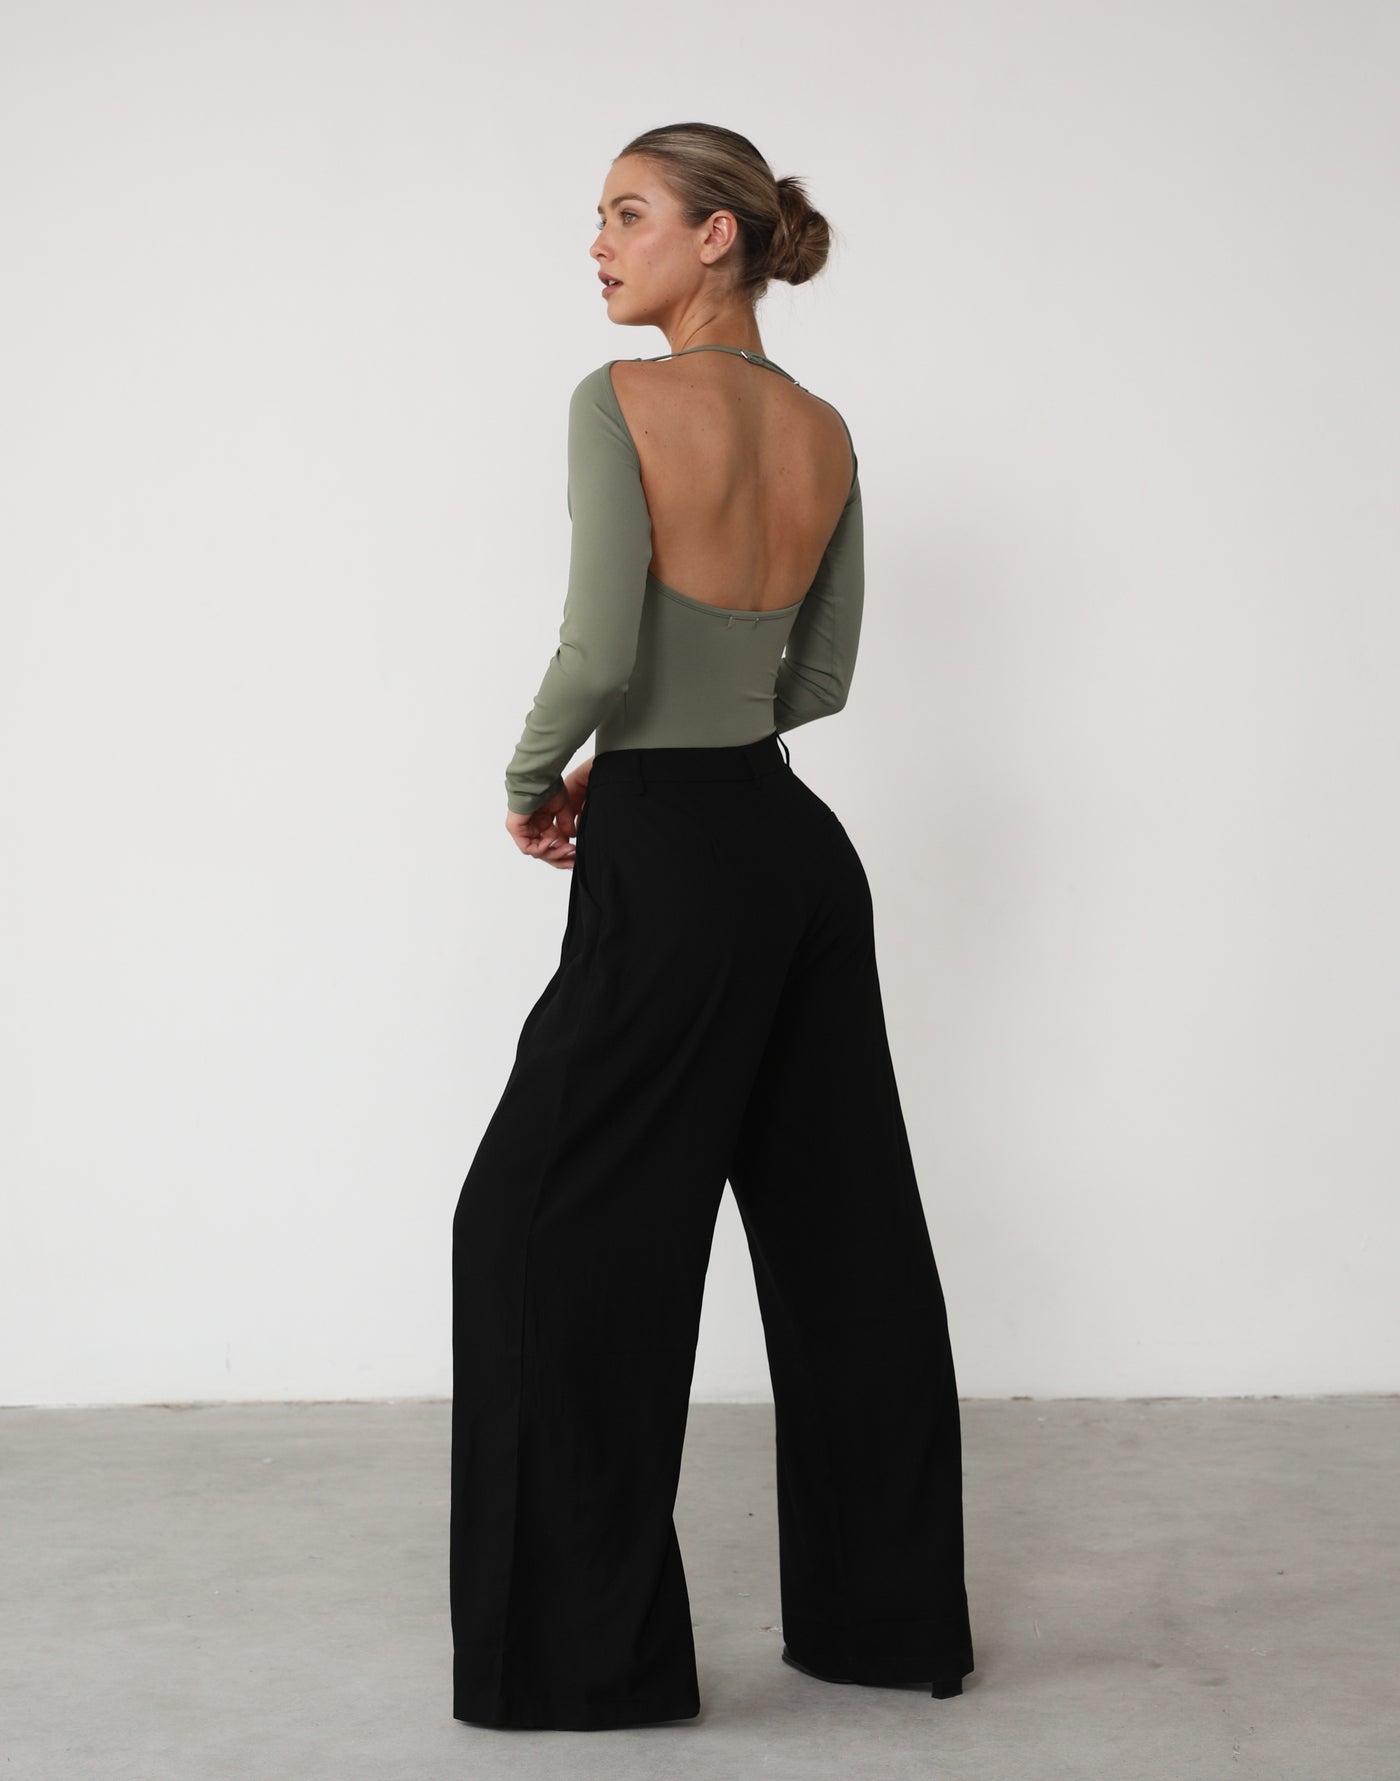 Nicky Bodysuit (Olive) - Long Sleeve Backless Bodysuit - Women's Top - Charcoal Clothing